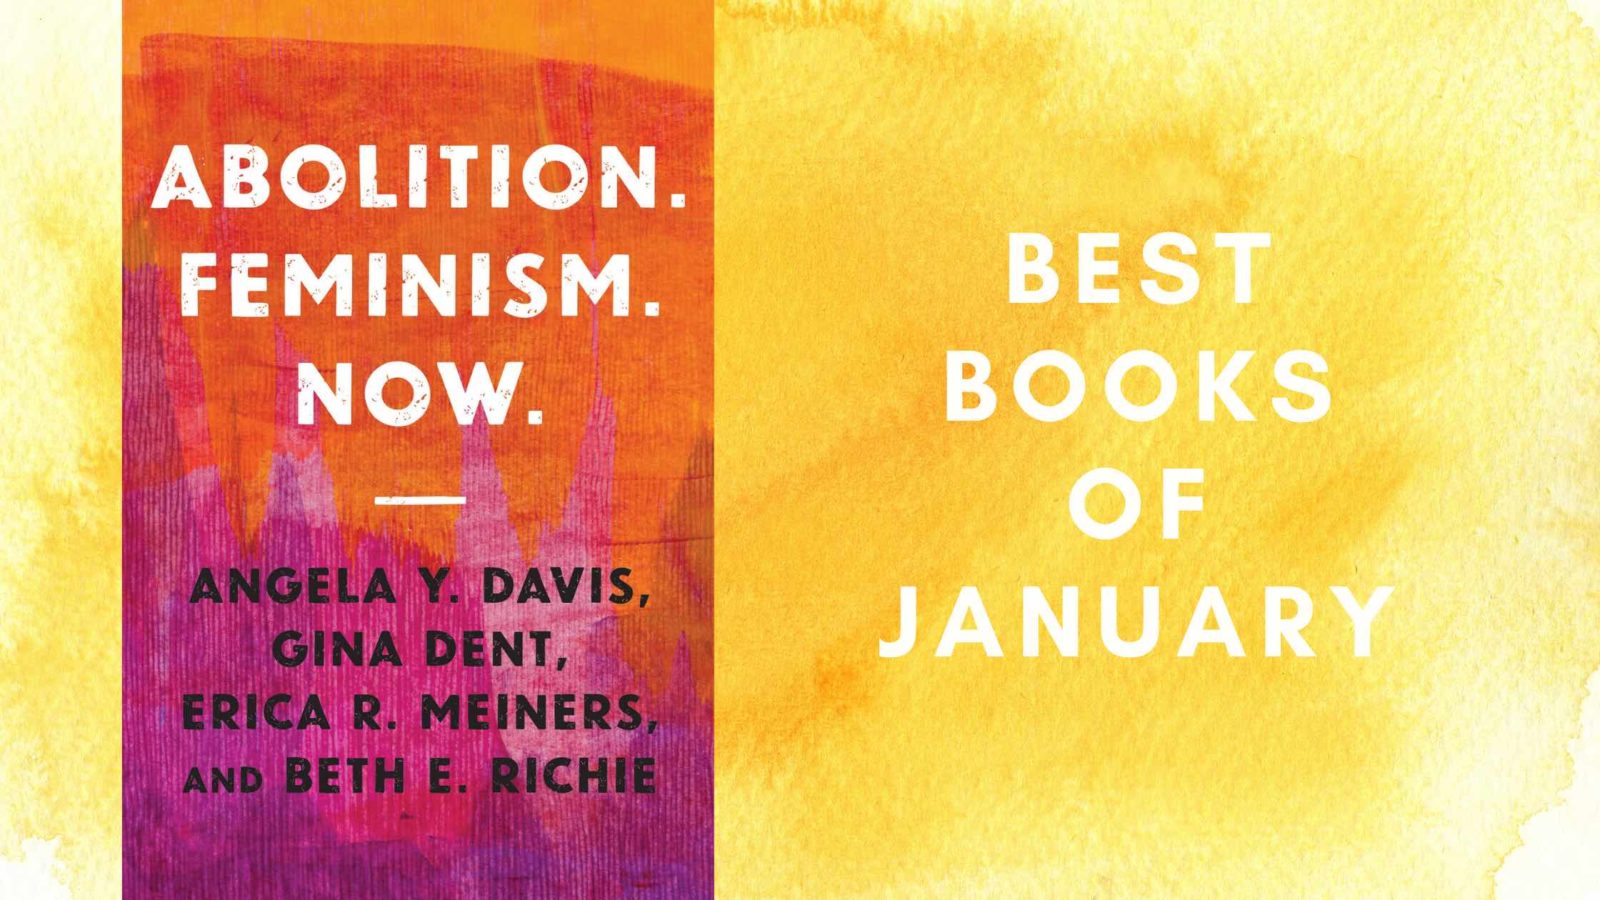 The most anticipated book of January includes Abolition Feminism Now.